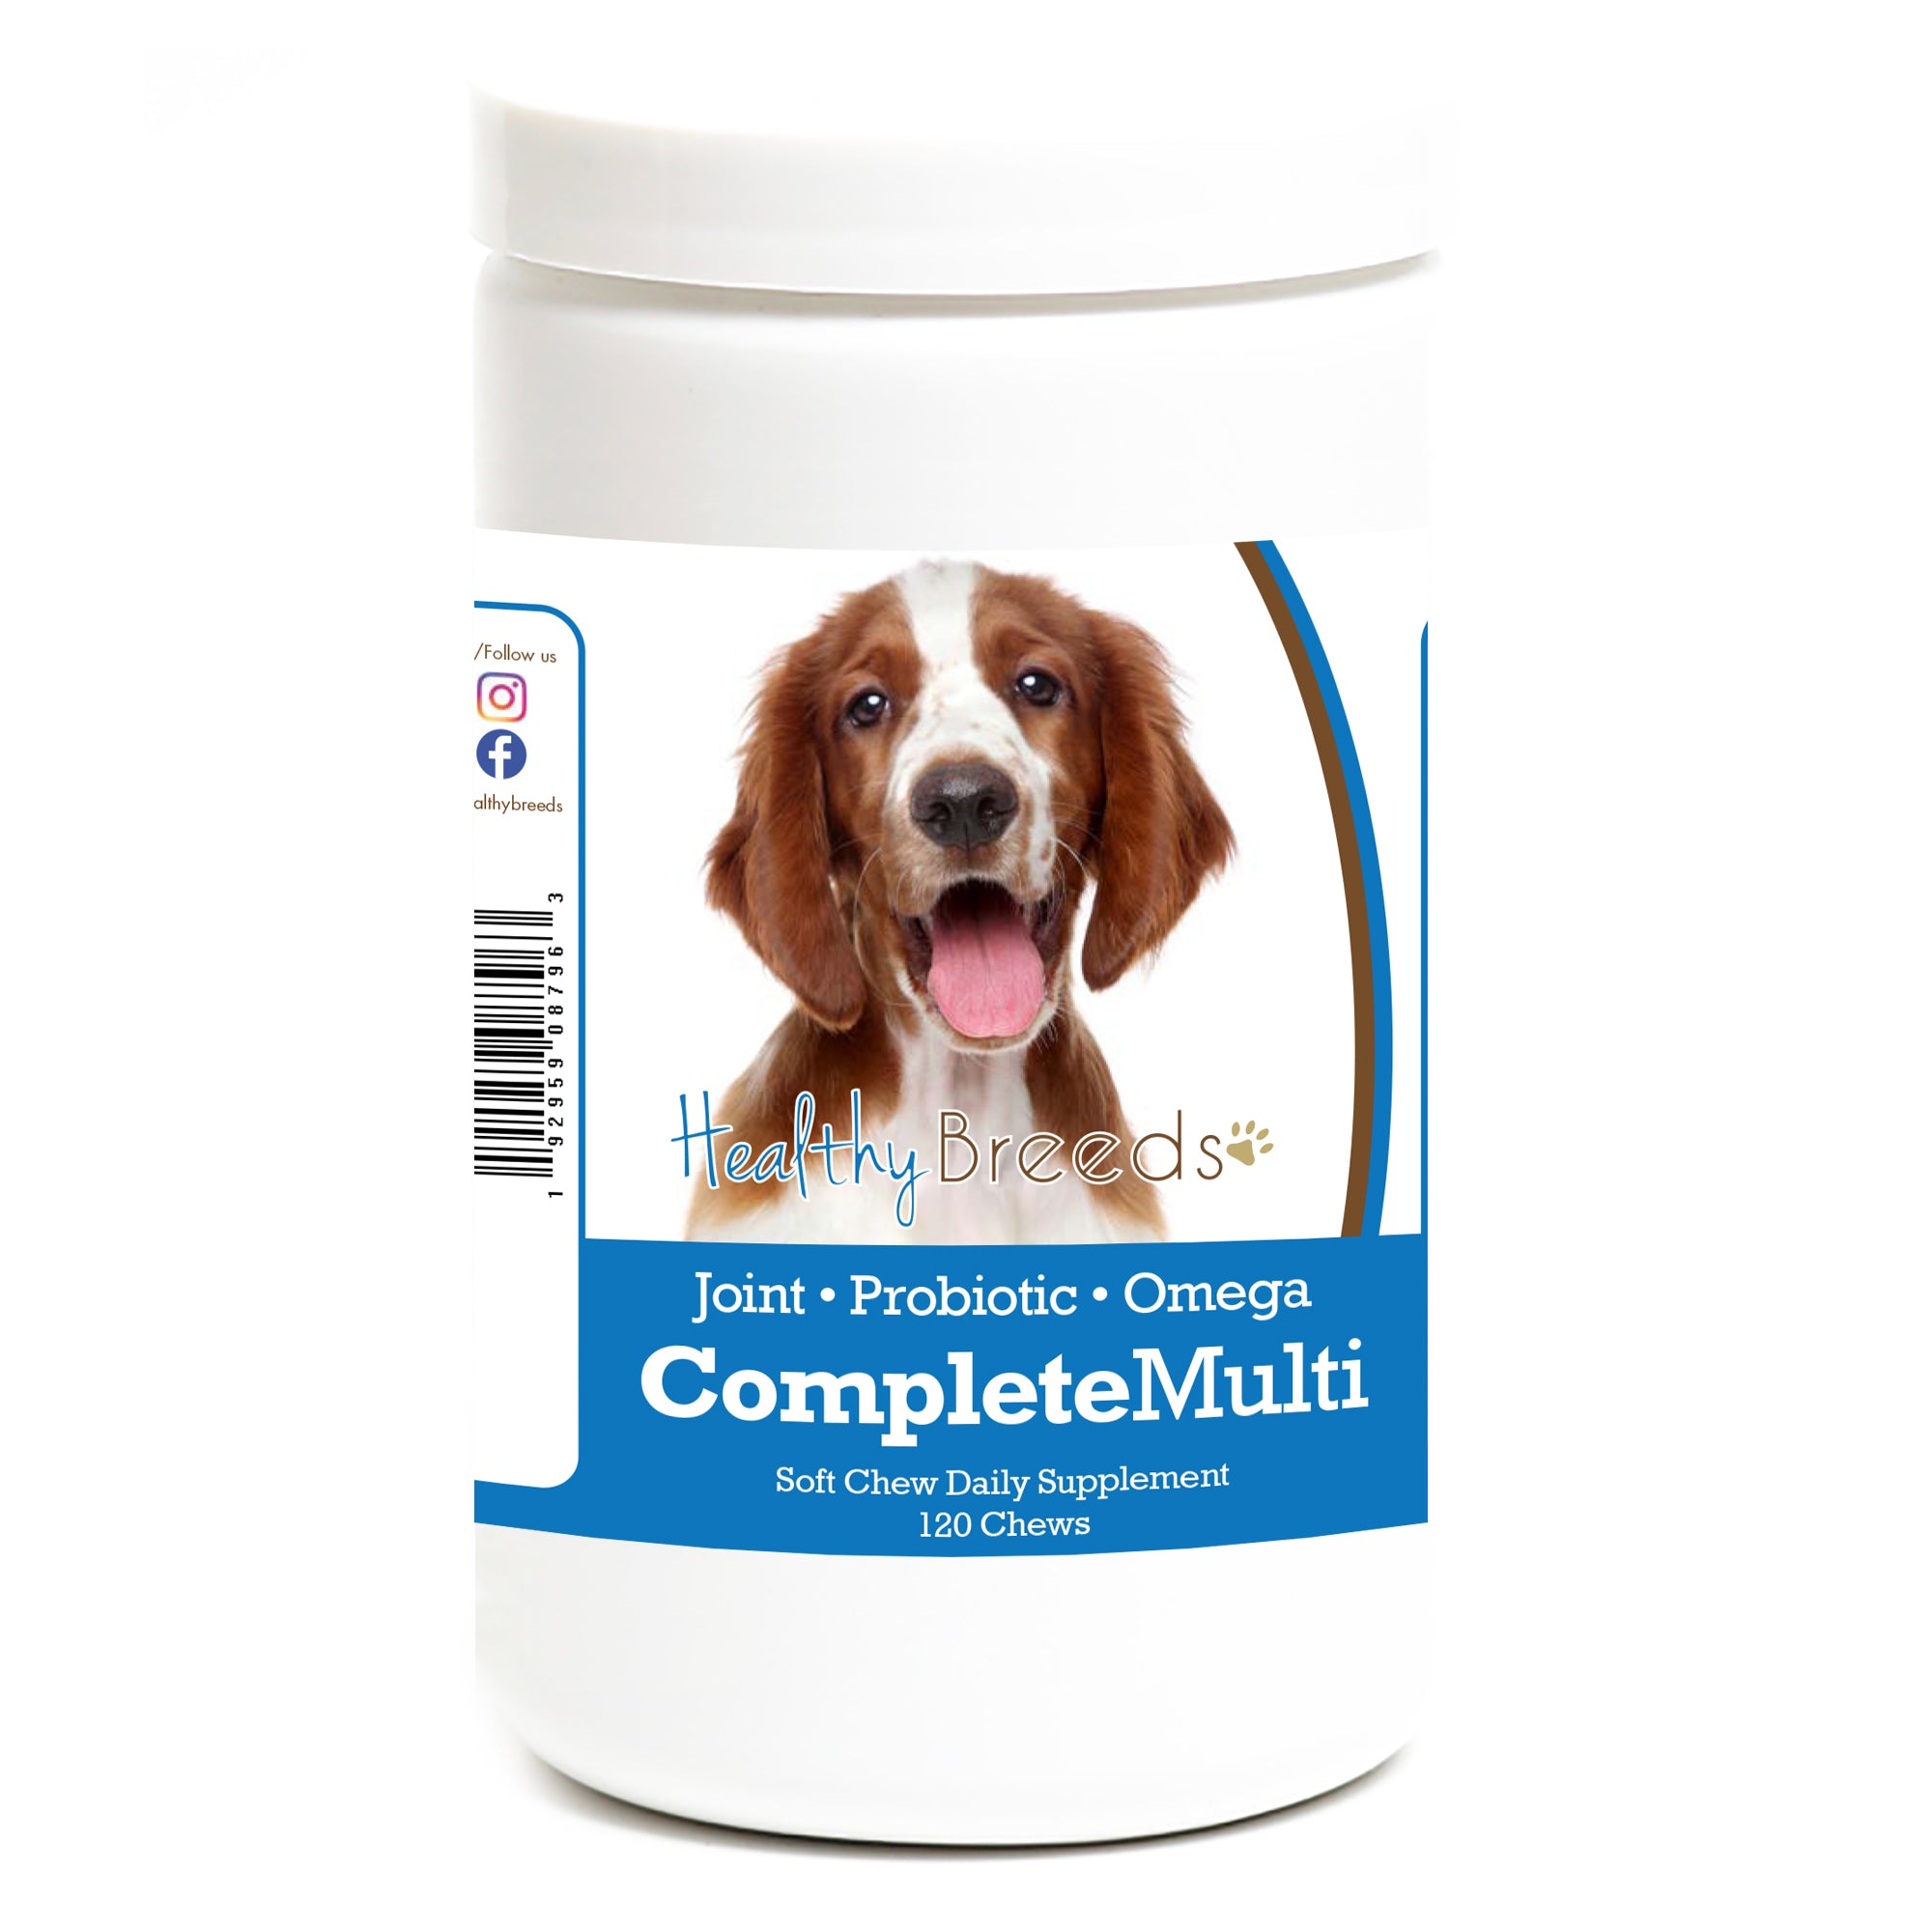 Welsh Springer Spaniel All In One Multivitamin Soft Chew 120 Count